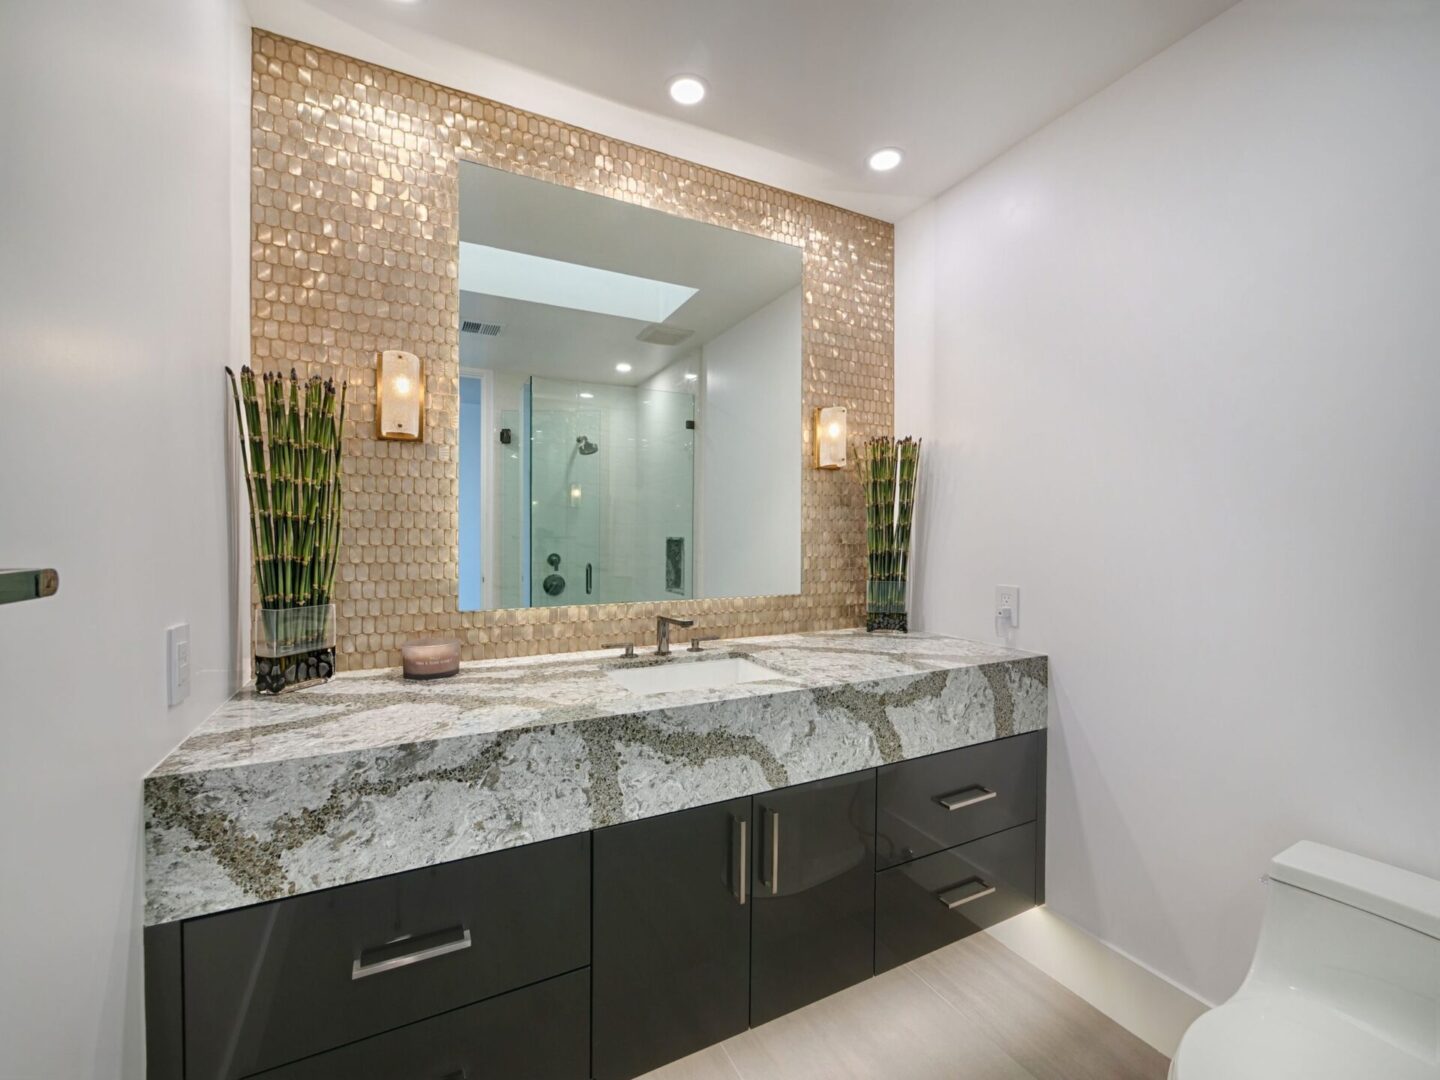 A bathroom with a large marble counter and a mirror.